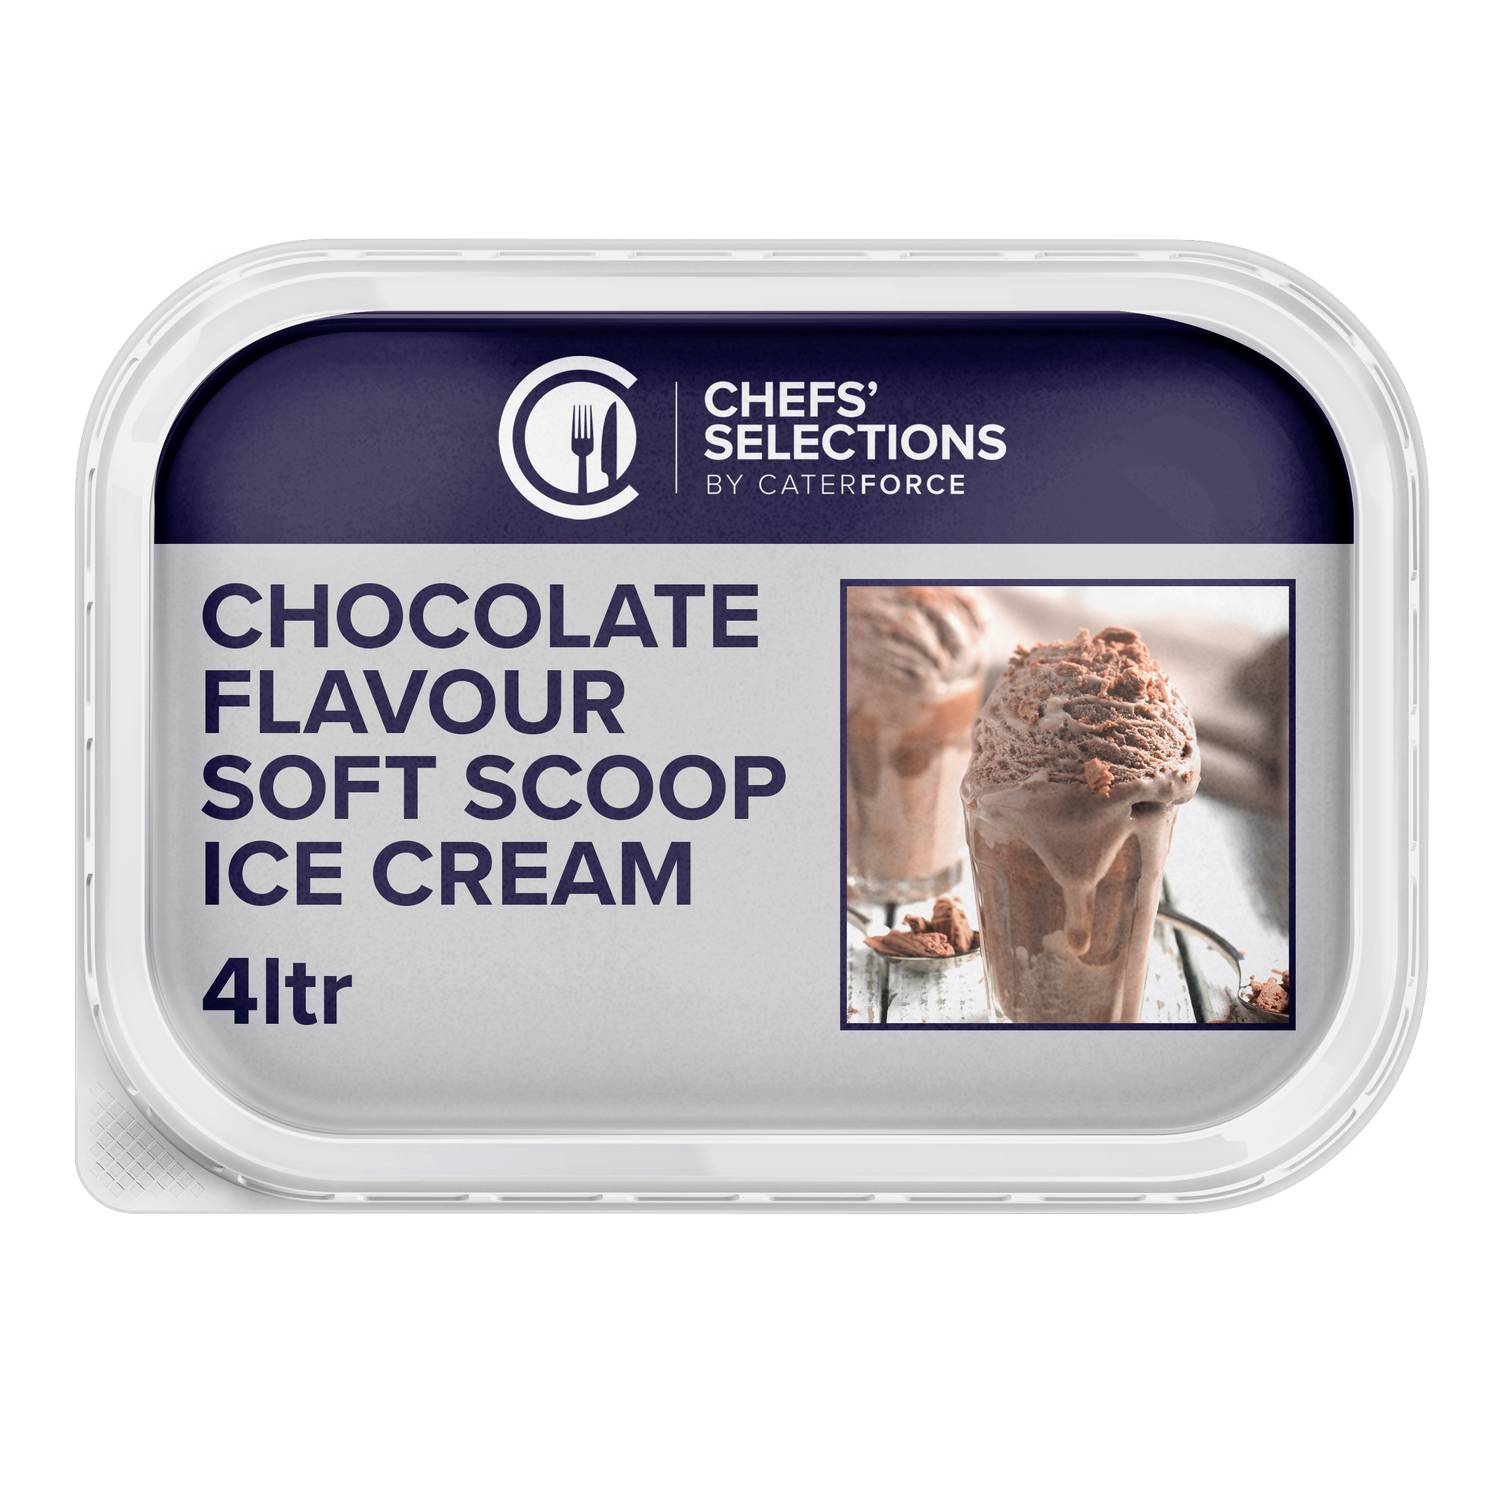 Chefs’ Selections Chocolate Flavour Soft Scoop Ice Cream (6 x 4L)